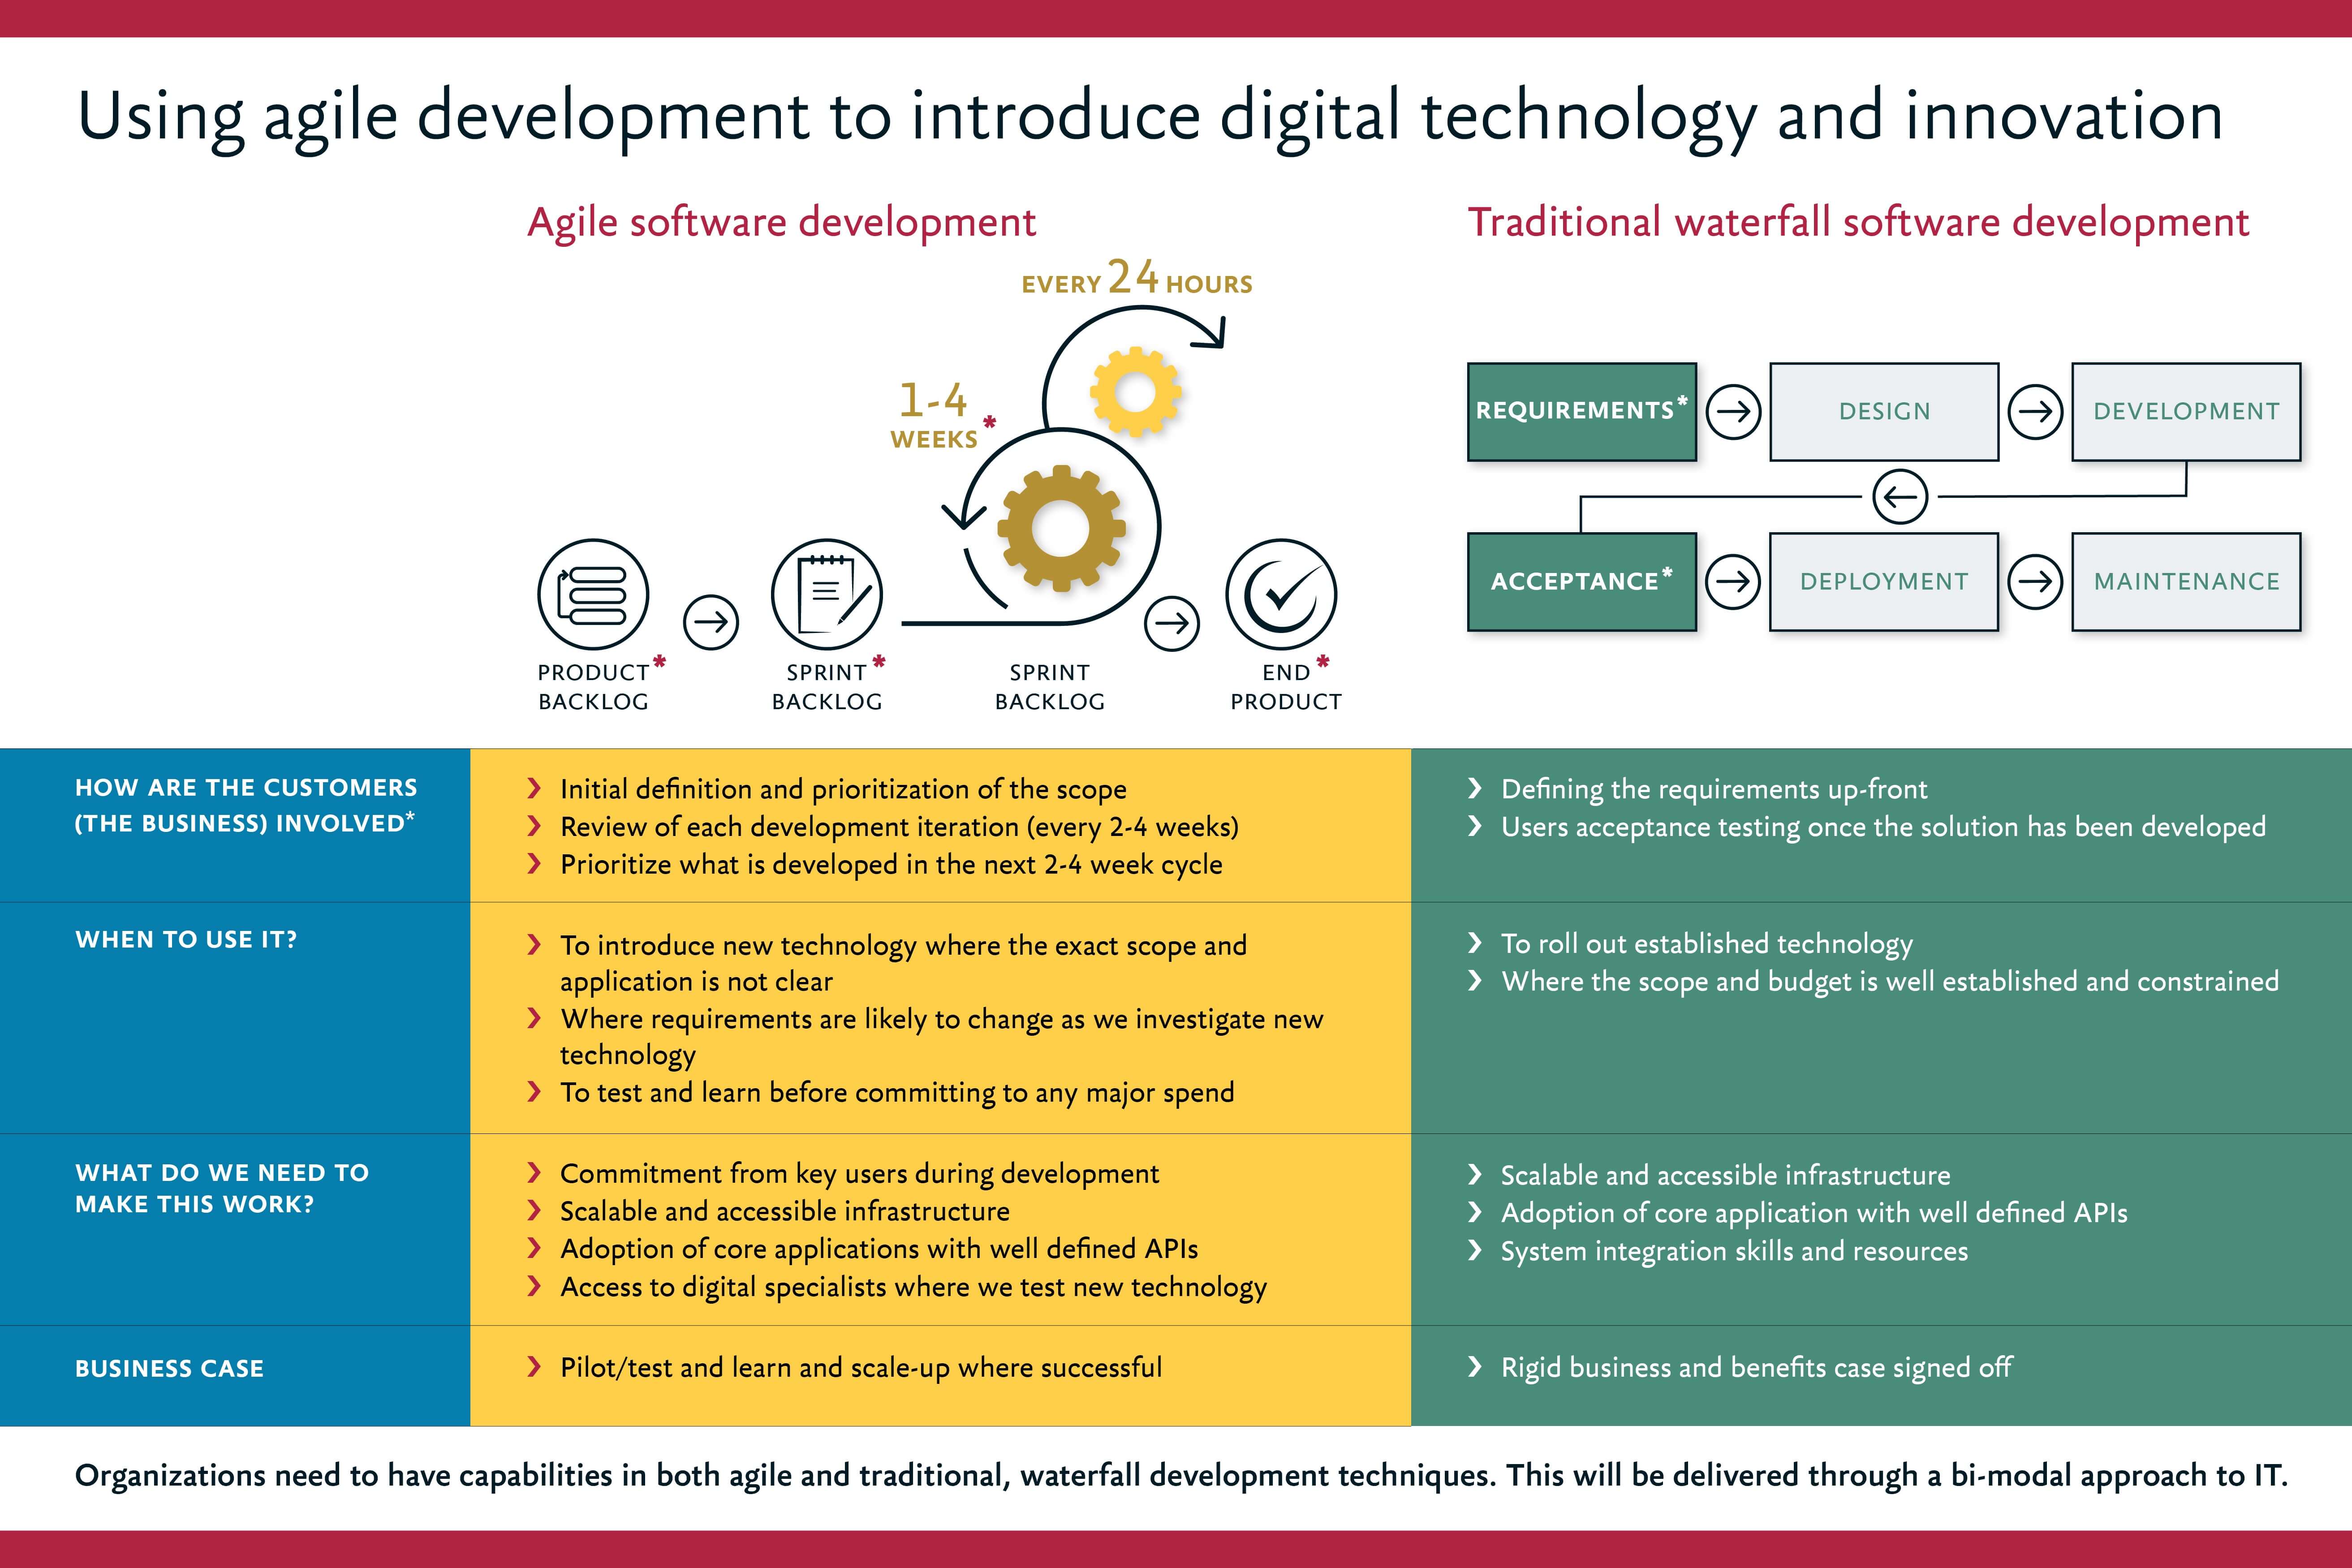 Using-Agile-development-to-introduce-digital-technology-and-innovation_US.jpg